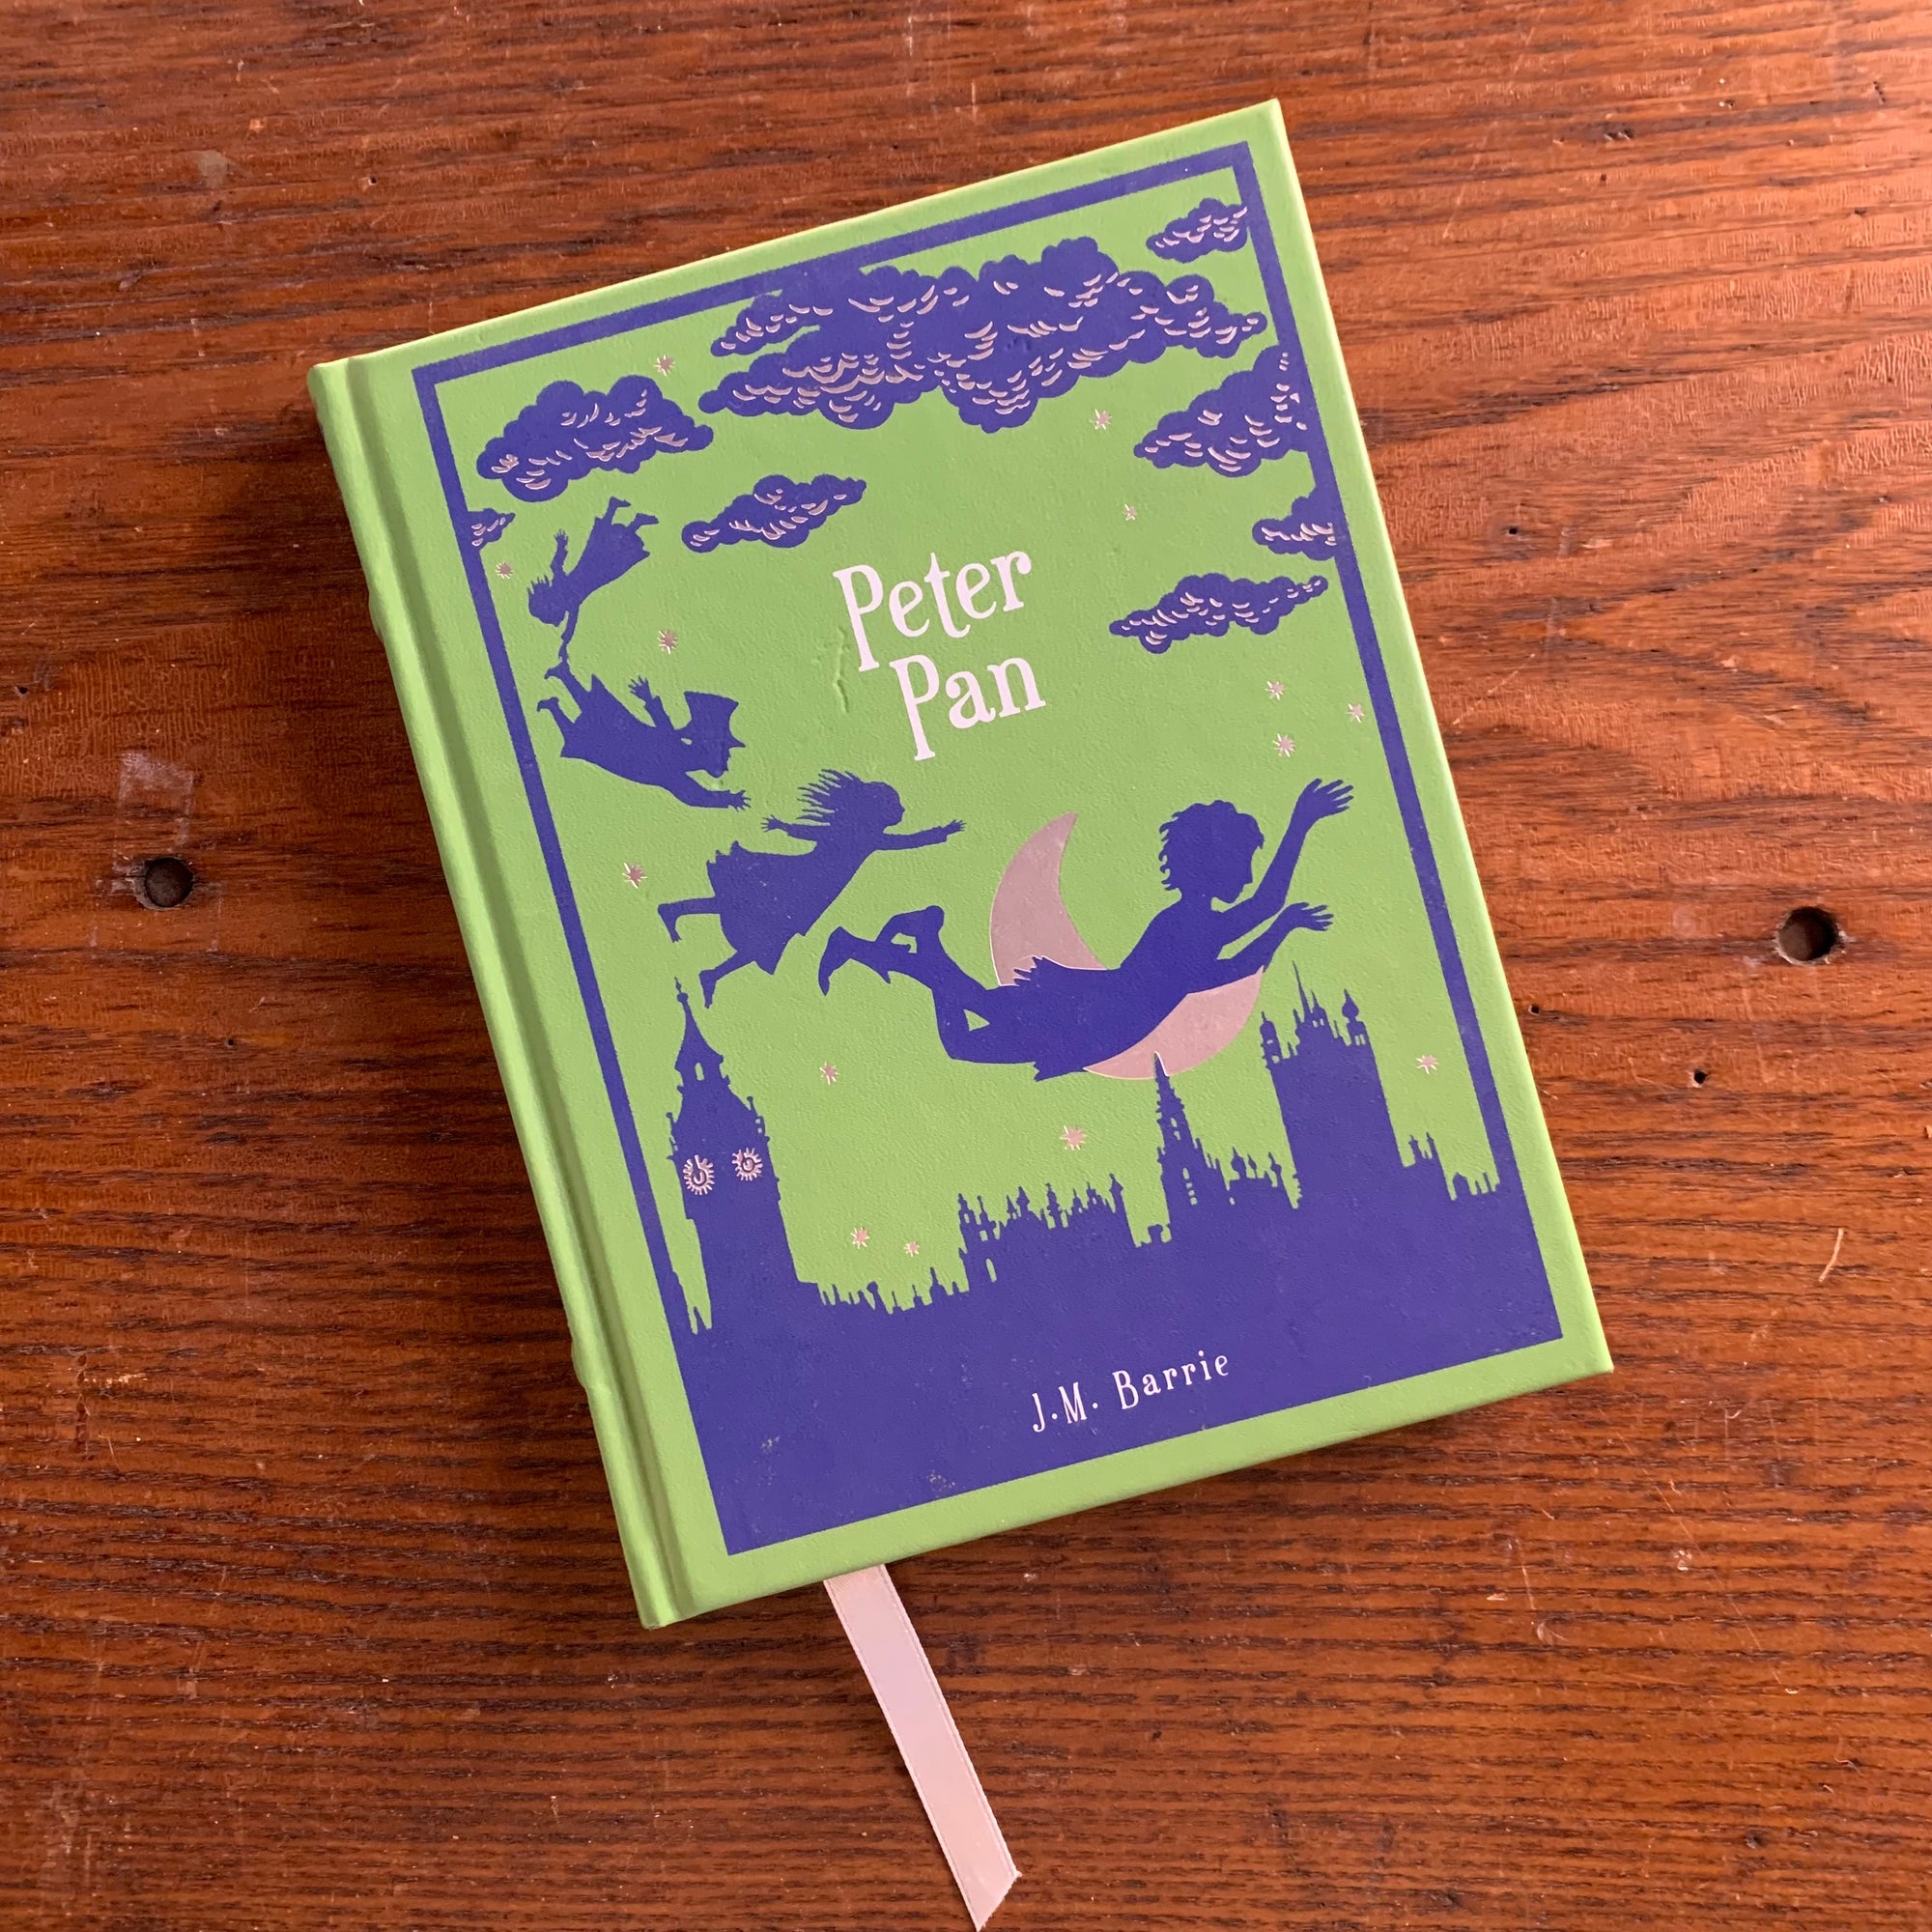 Peter Pan by J. M. Barrie - A 2012 Barnes & Noble Leather-Bound Edition